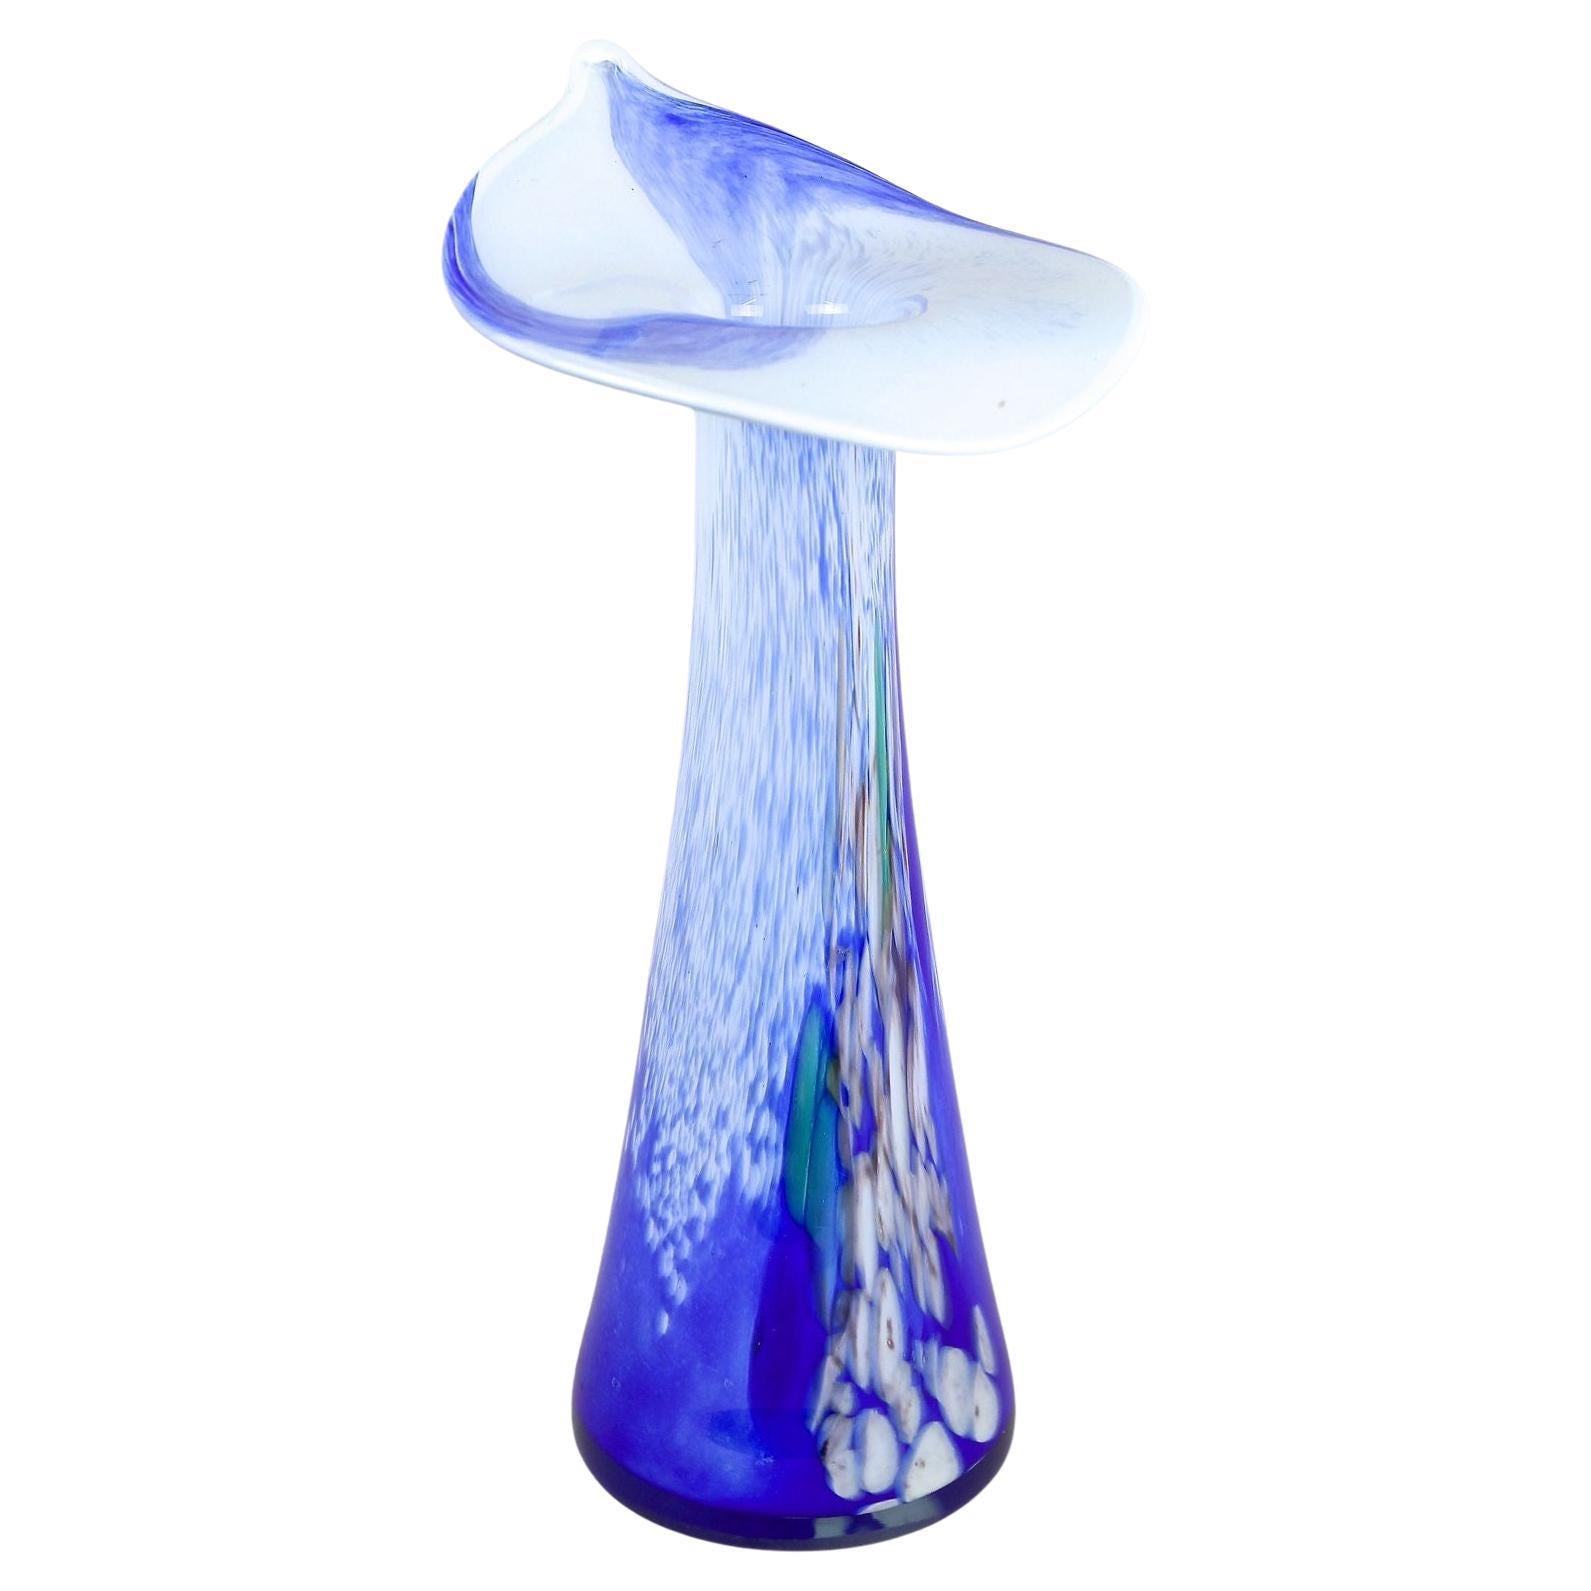 Murano Glass Vase "Jack In The Pulpit", Italy circa 1965